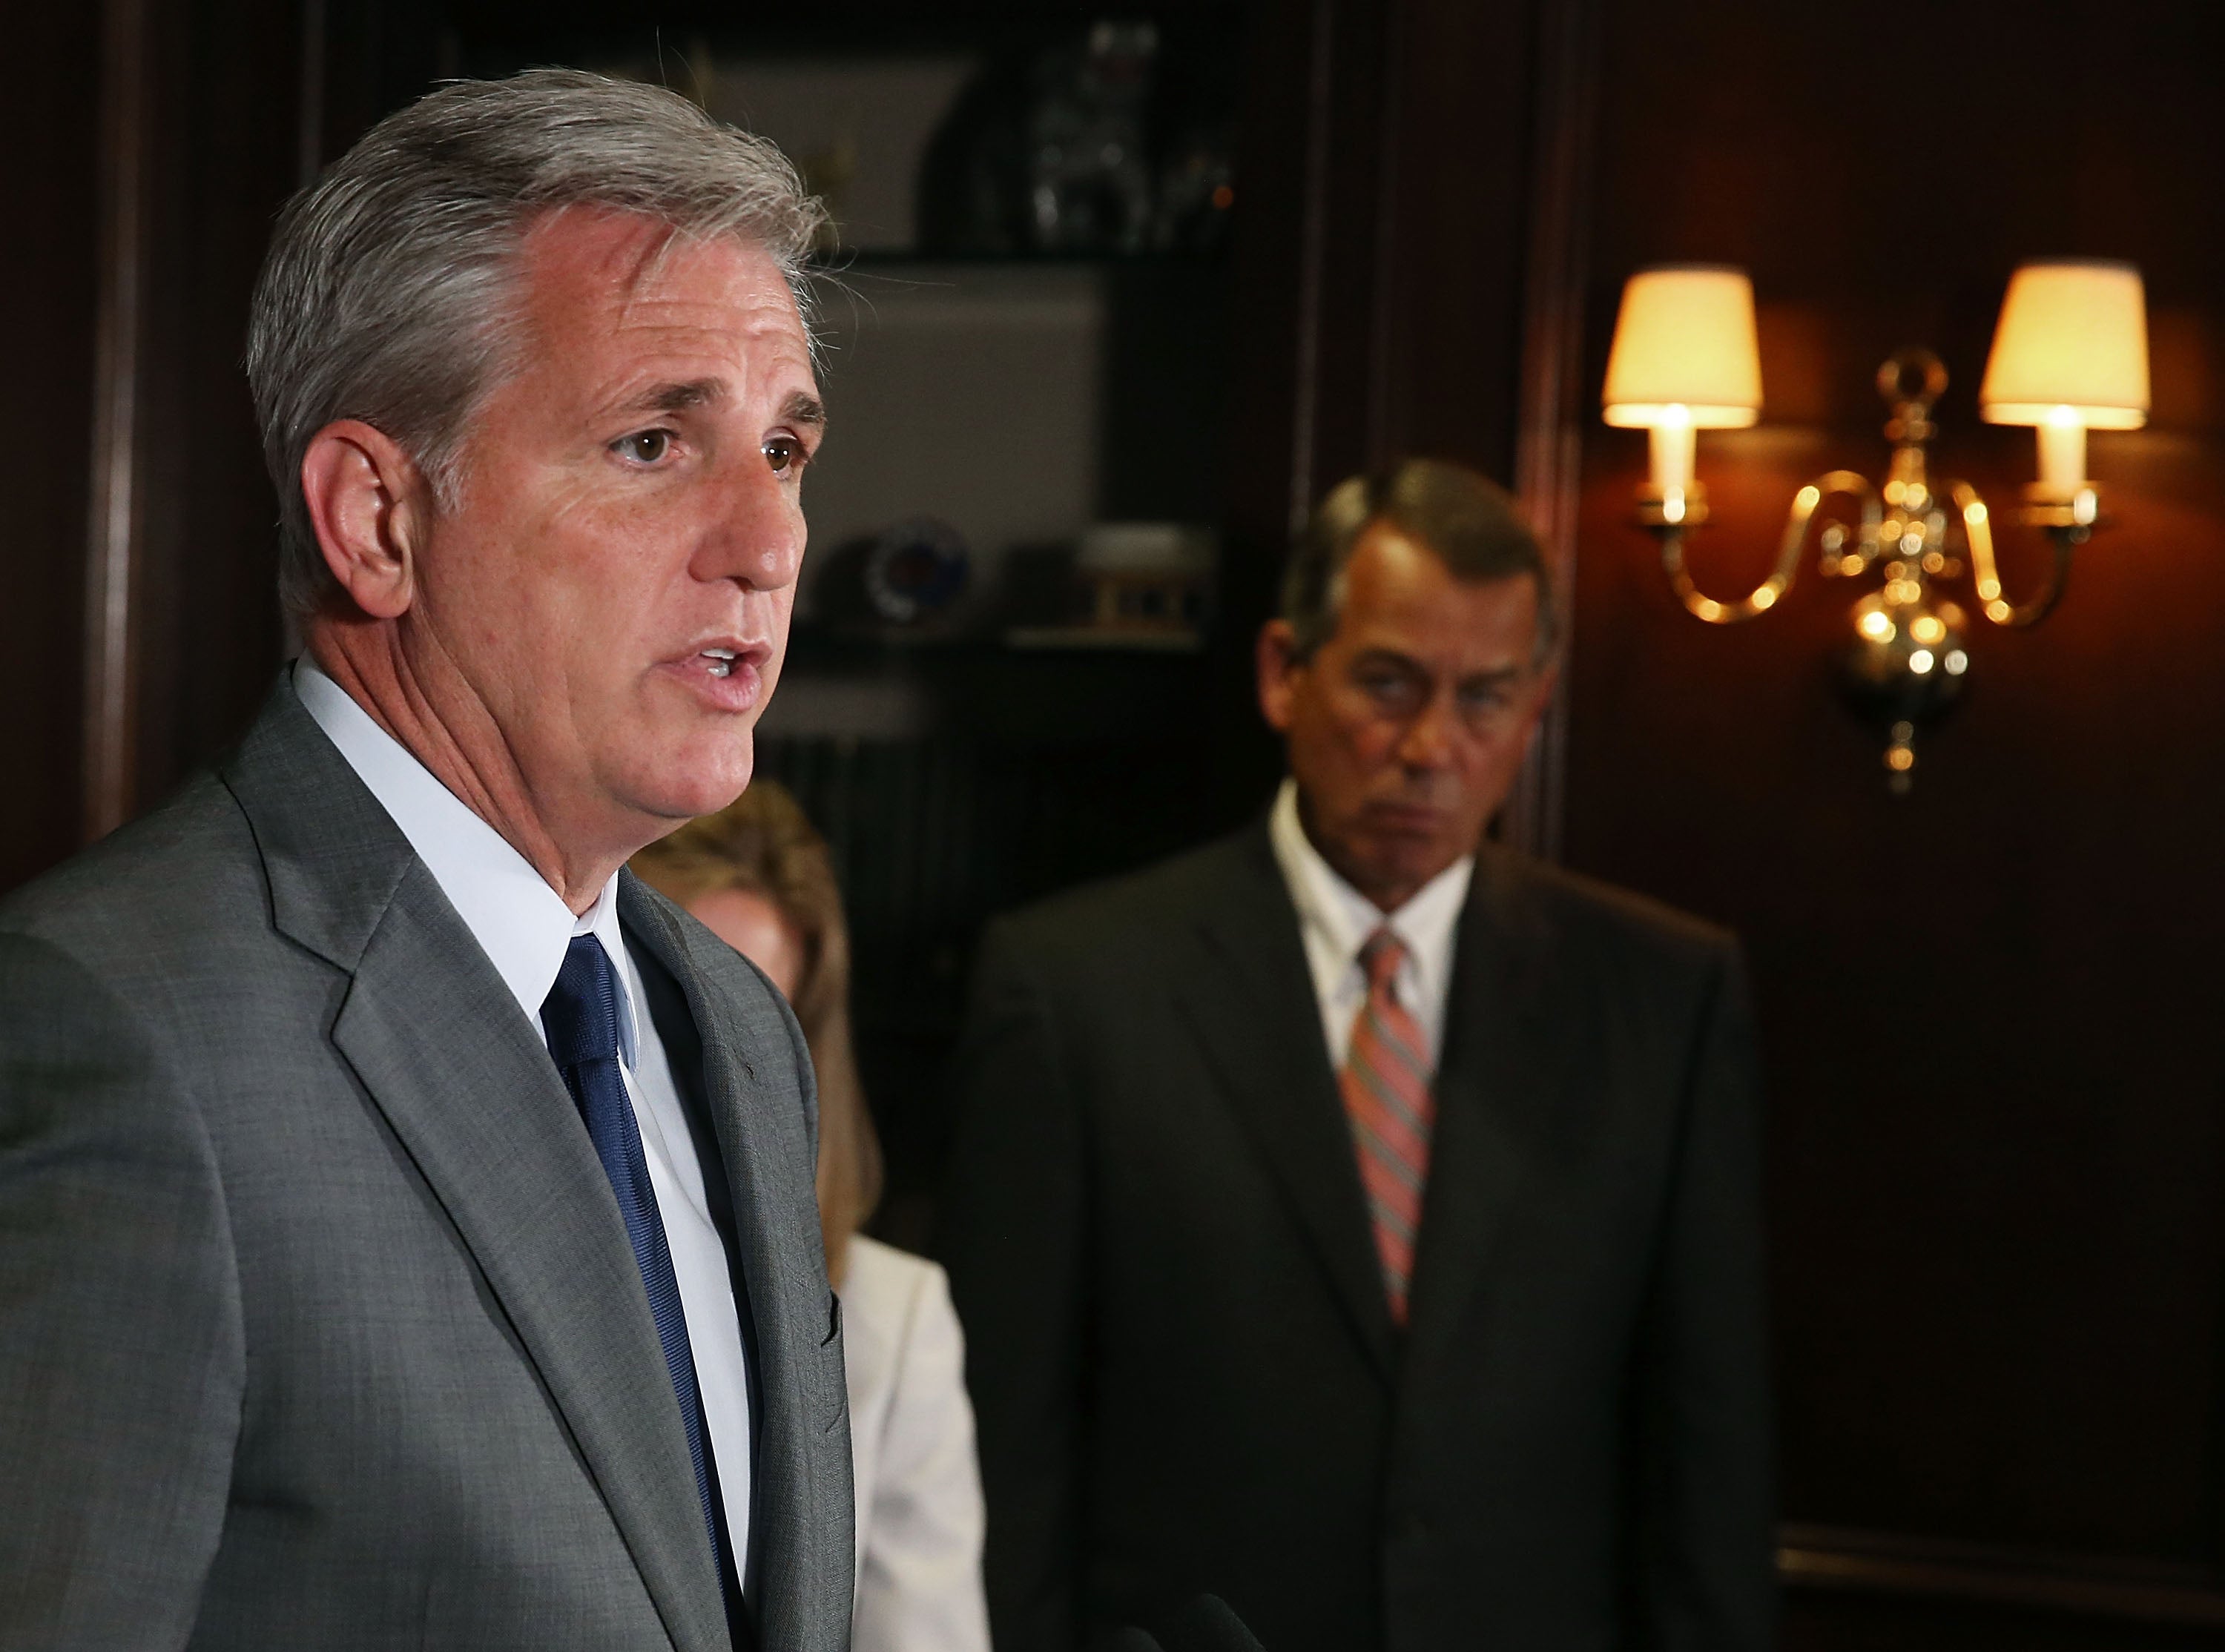 Kevin McCarthy speaks while flanked by John Boehner (R-OH) during a press conference in Washington DC.